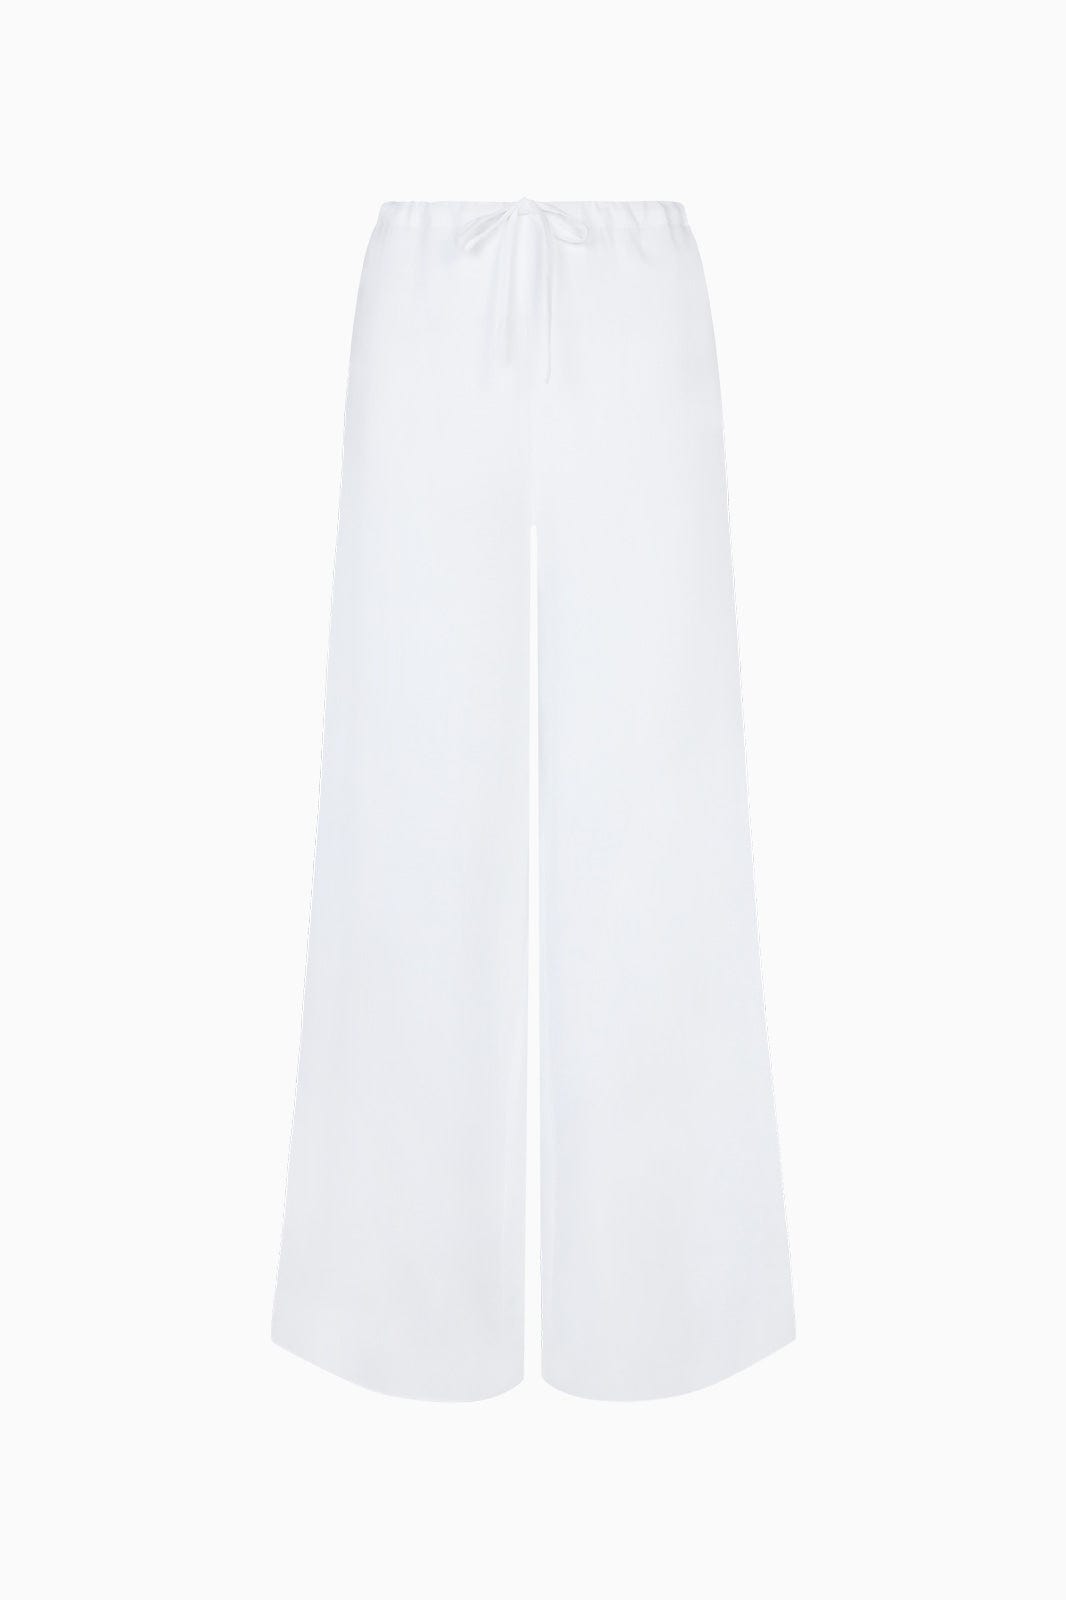 arkitaip Trousers The Blanca Lounge Wear Set in white